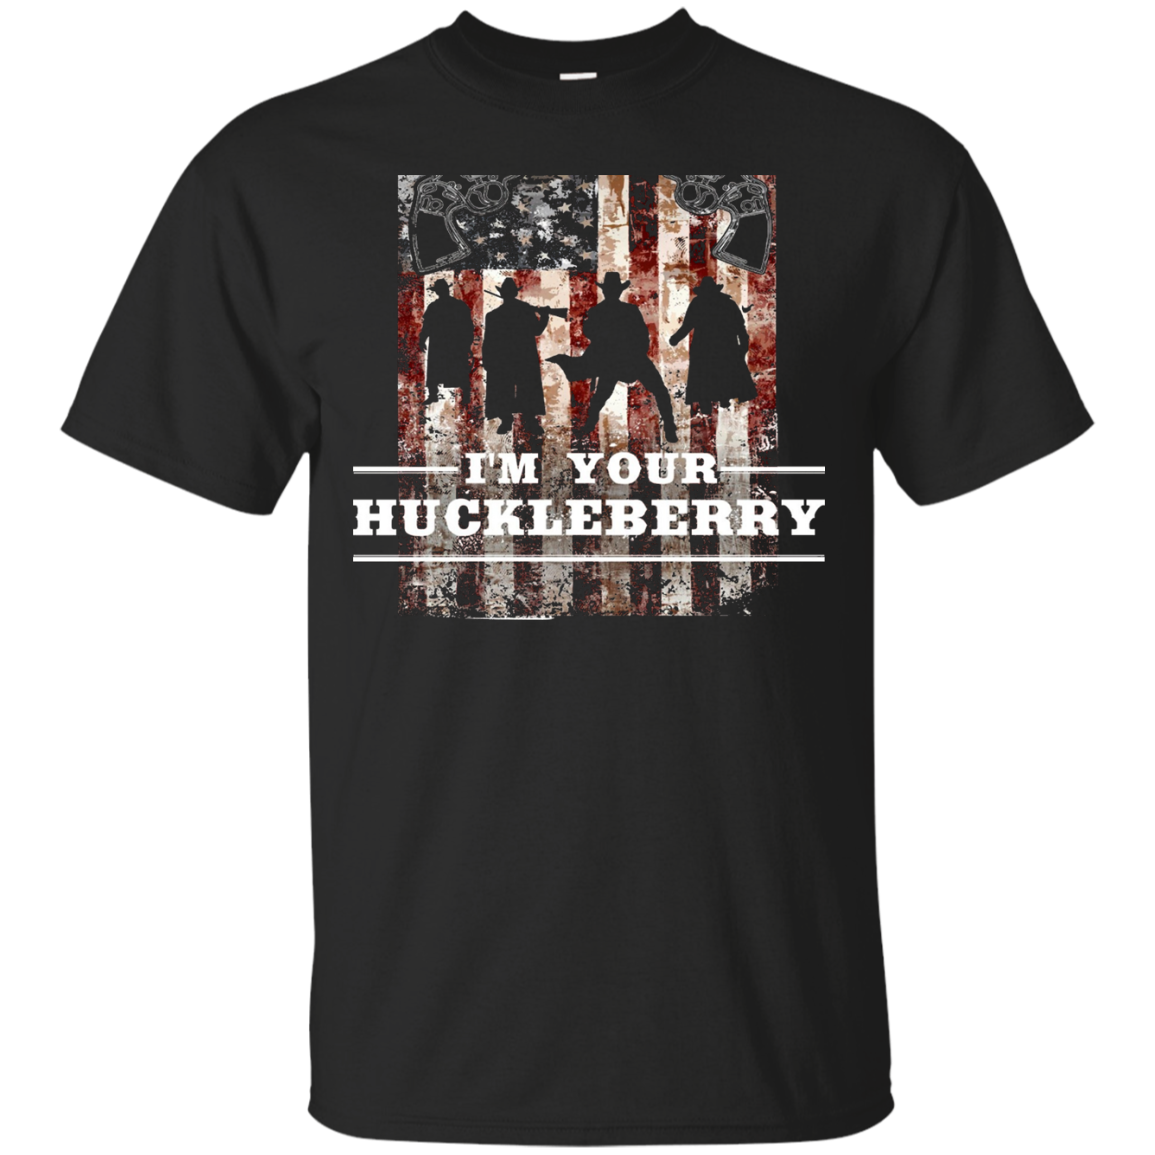 I'm your Huckleberry - American